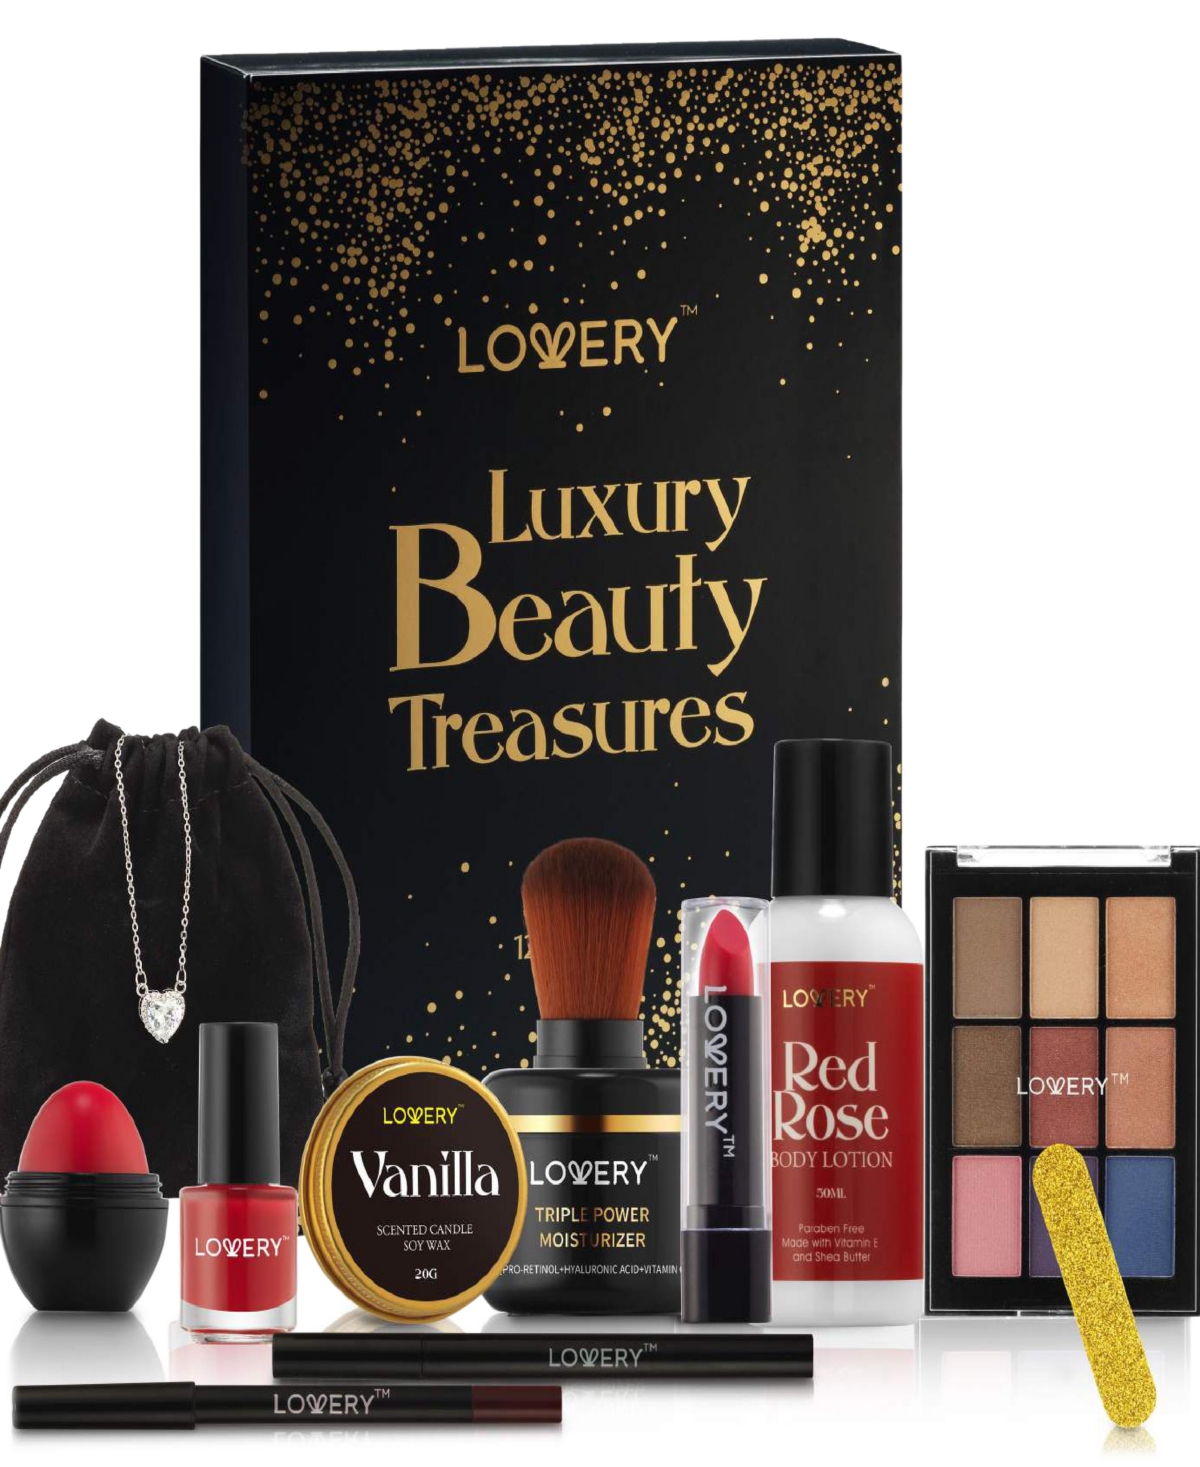 Lovery 13-pc. Luxury Beauty Treasures Body Care & Makeup Gift Set In No Color